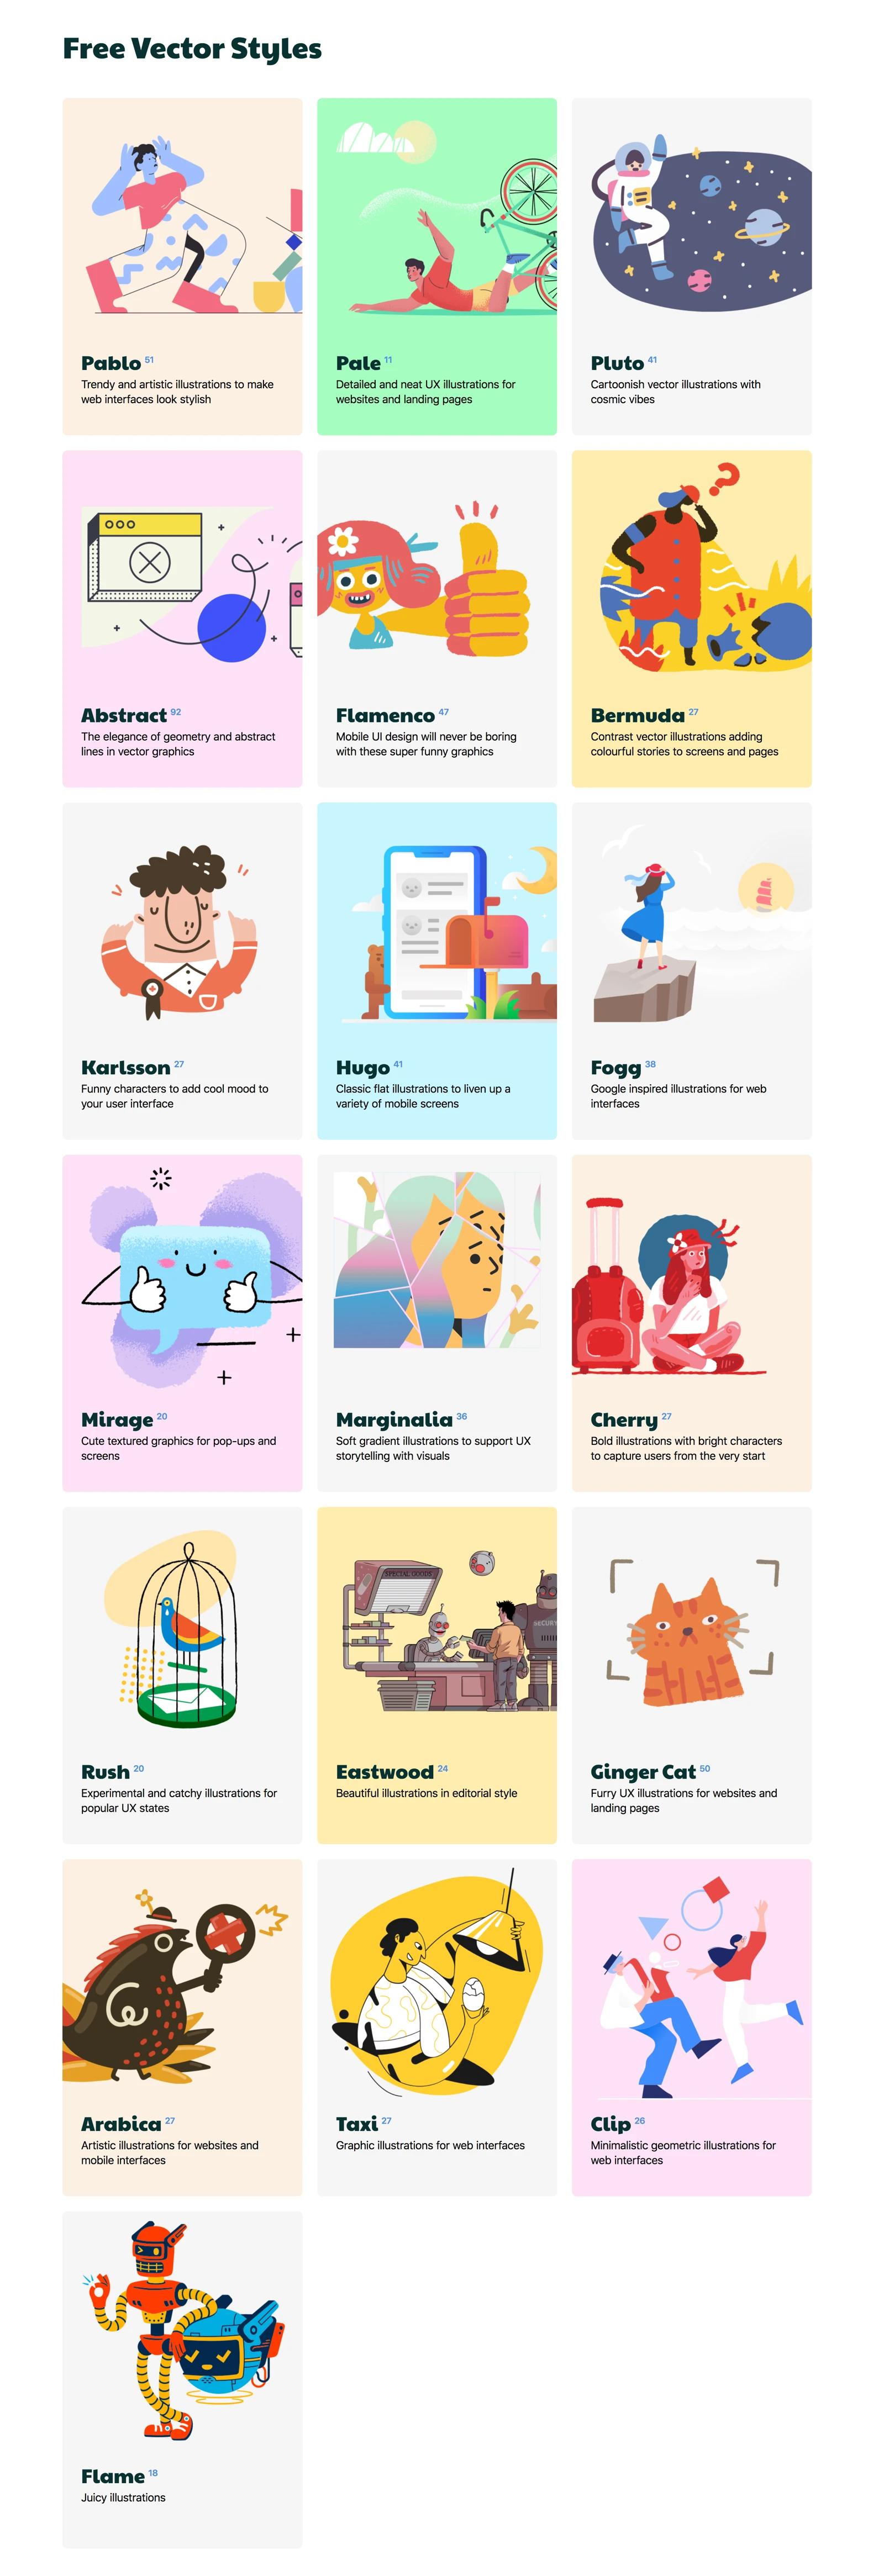 Ouch! - Free illustrations - Ouch helps creators who don’t draw overcome the lack of quality graphics. Download the free illustrations from top Dribbble artists to class up your product.